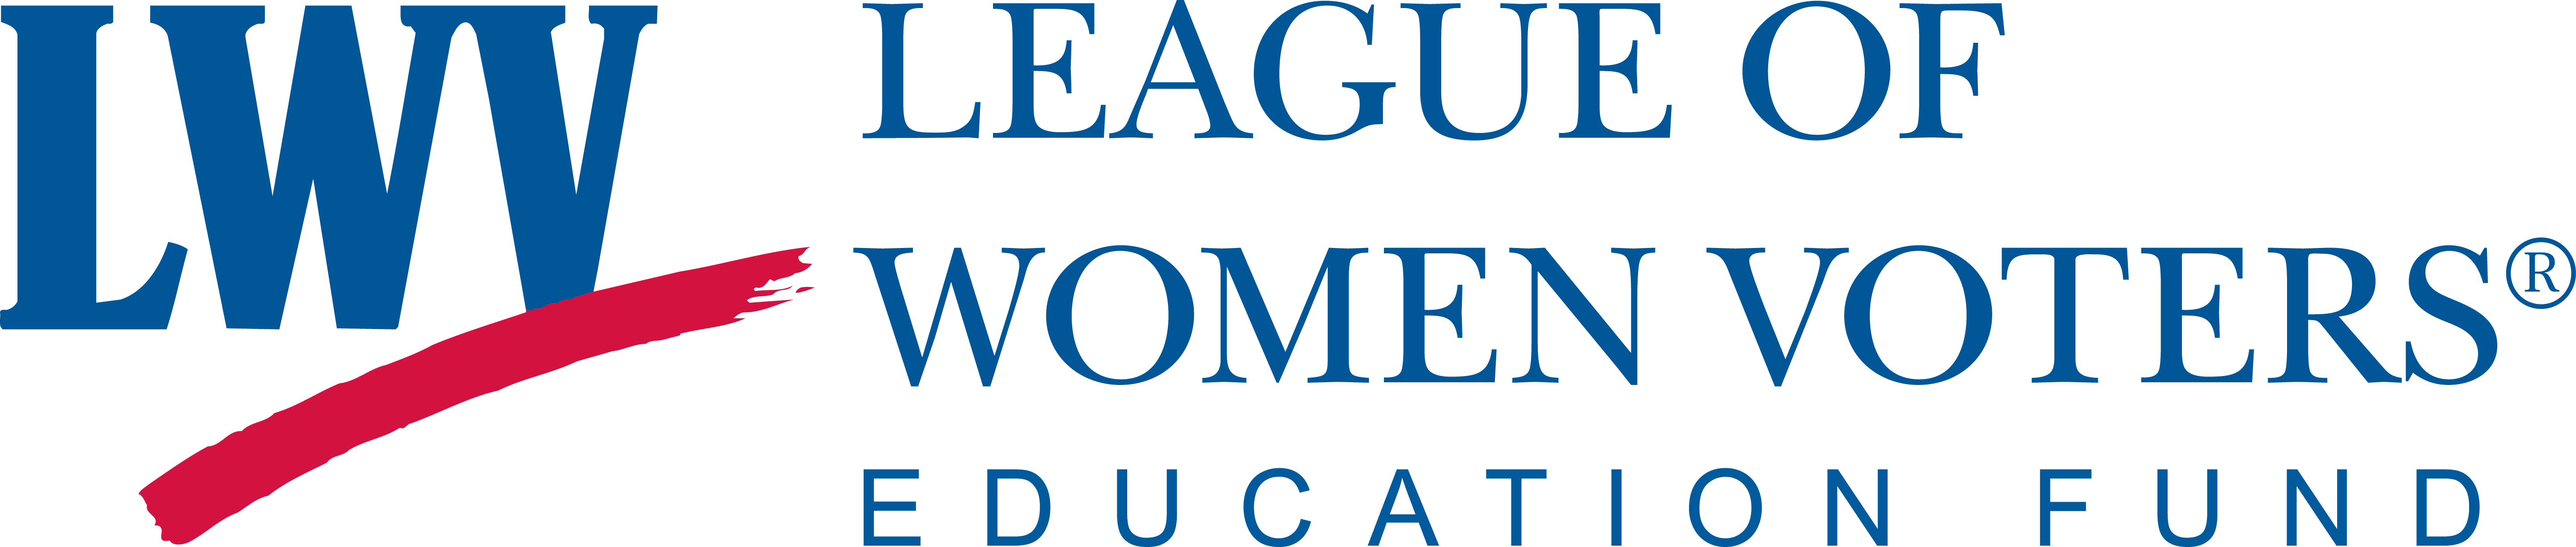 The League of Women Voters Education Fund